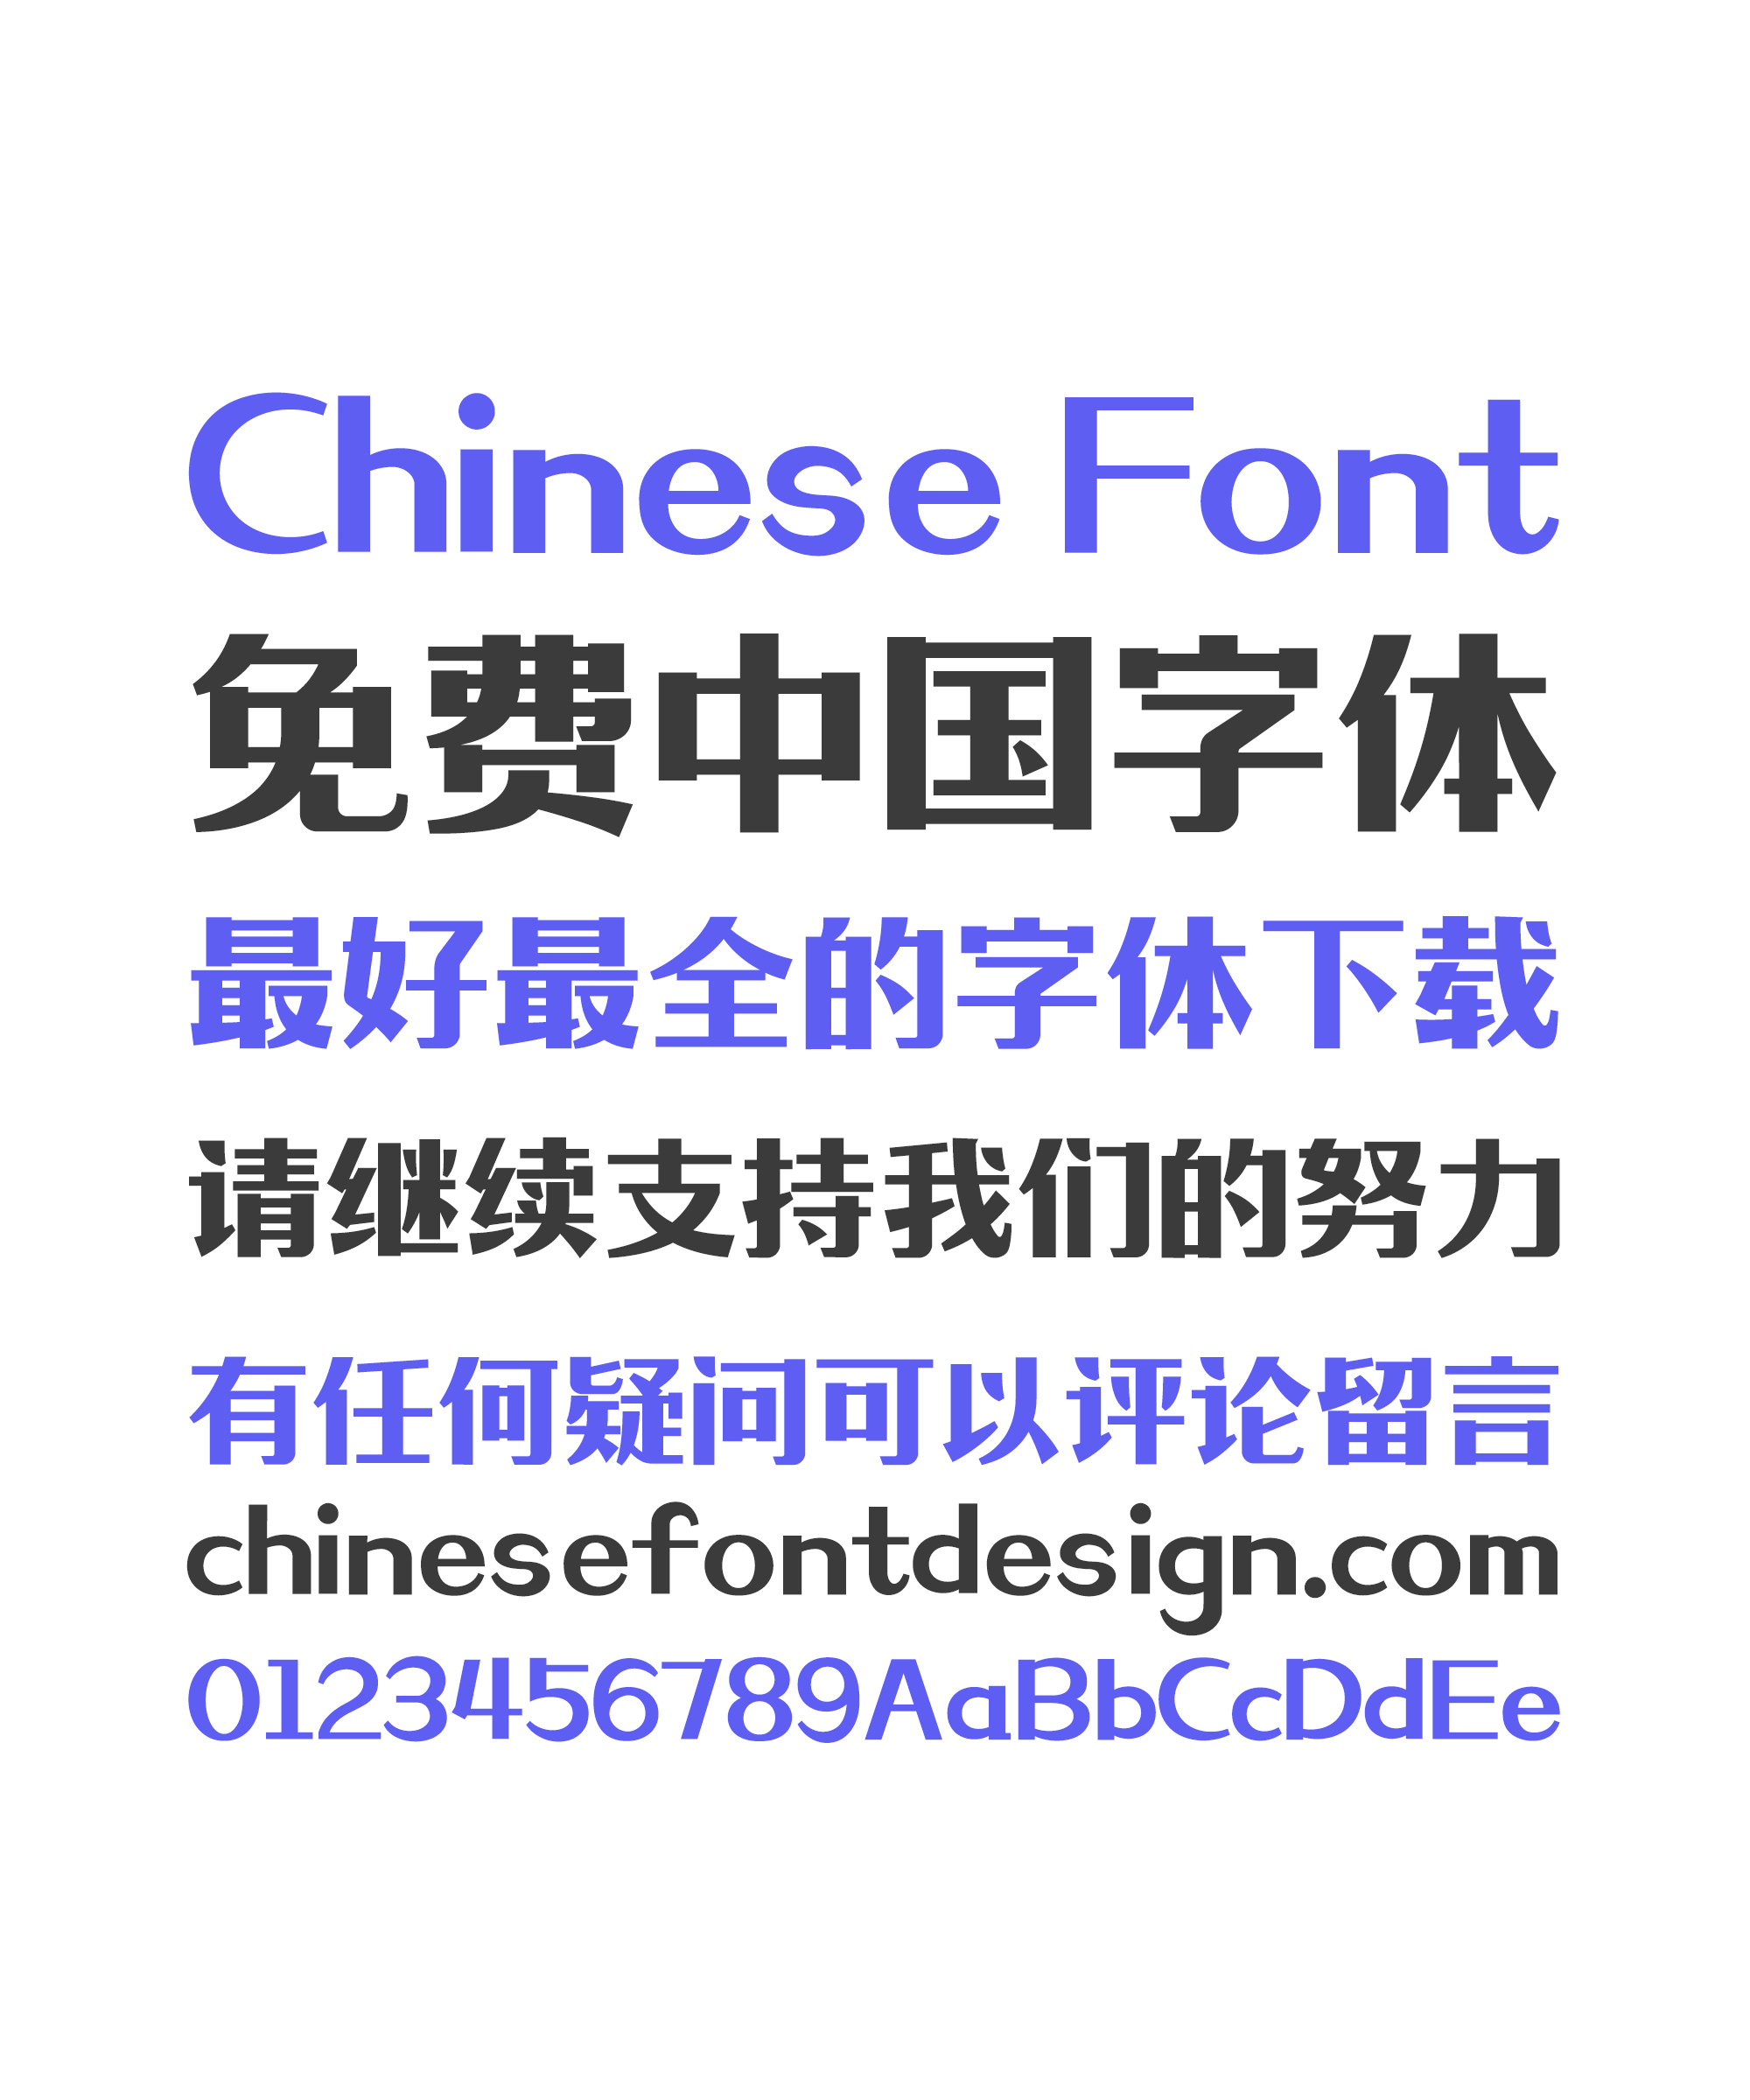 Zao Zi Gong Fang (Make Font) Perfect Song (Ming) Typeface Chinese Font -Simplified Chinese Fonts